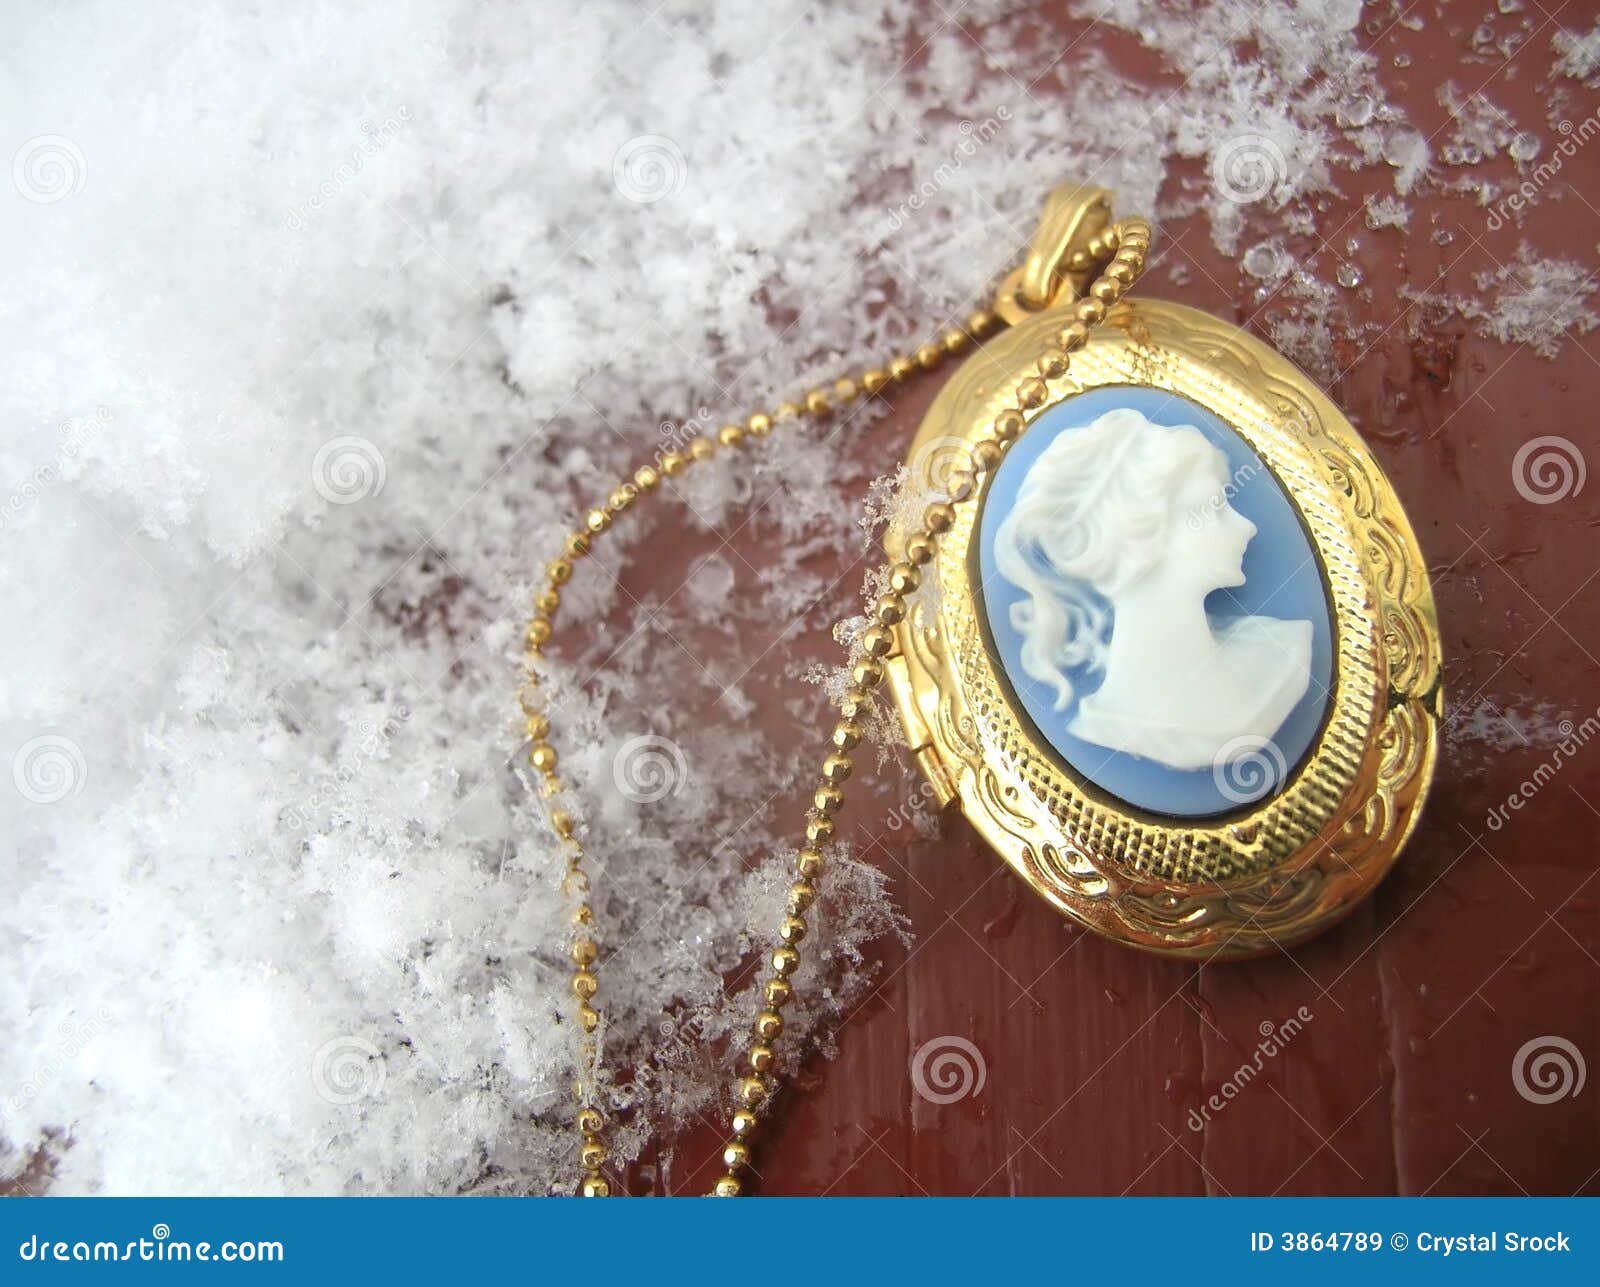 Victorian Lady Cameo Locket Necklace, Large Oval Gold Photo Locket Necklace,  Personalized Gift for Women Mom Wife Girlfriend - Etsy